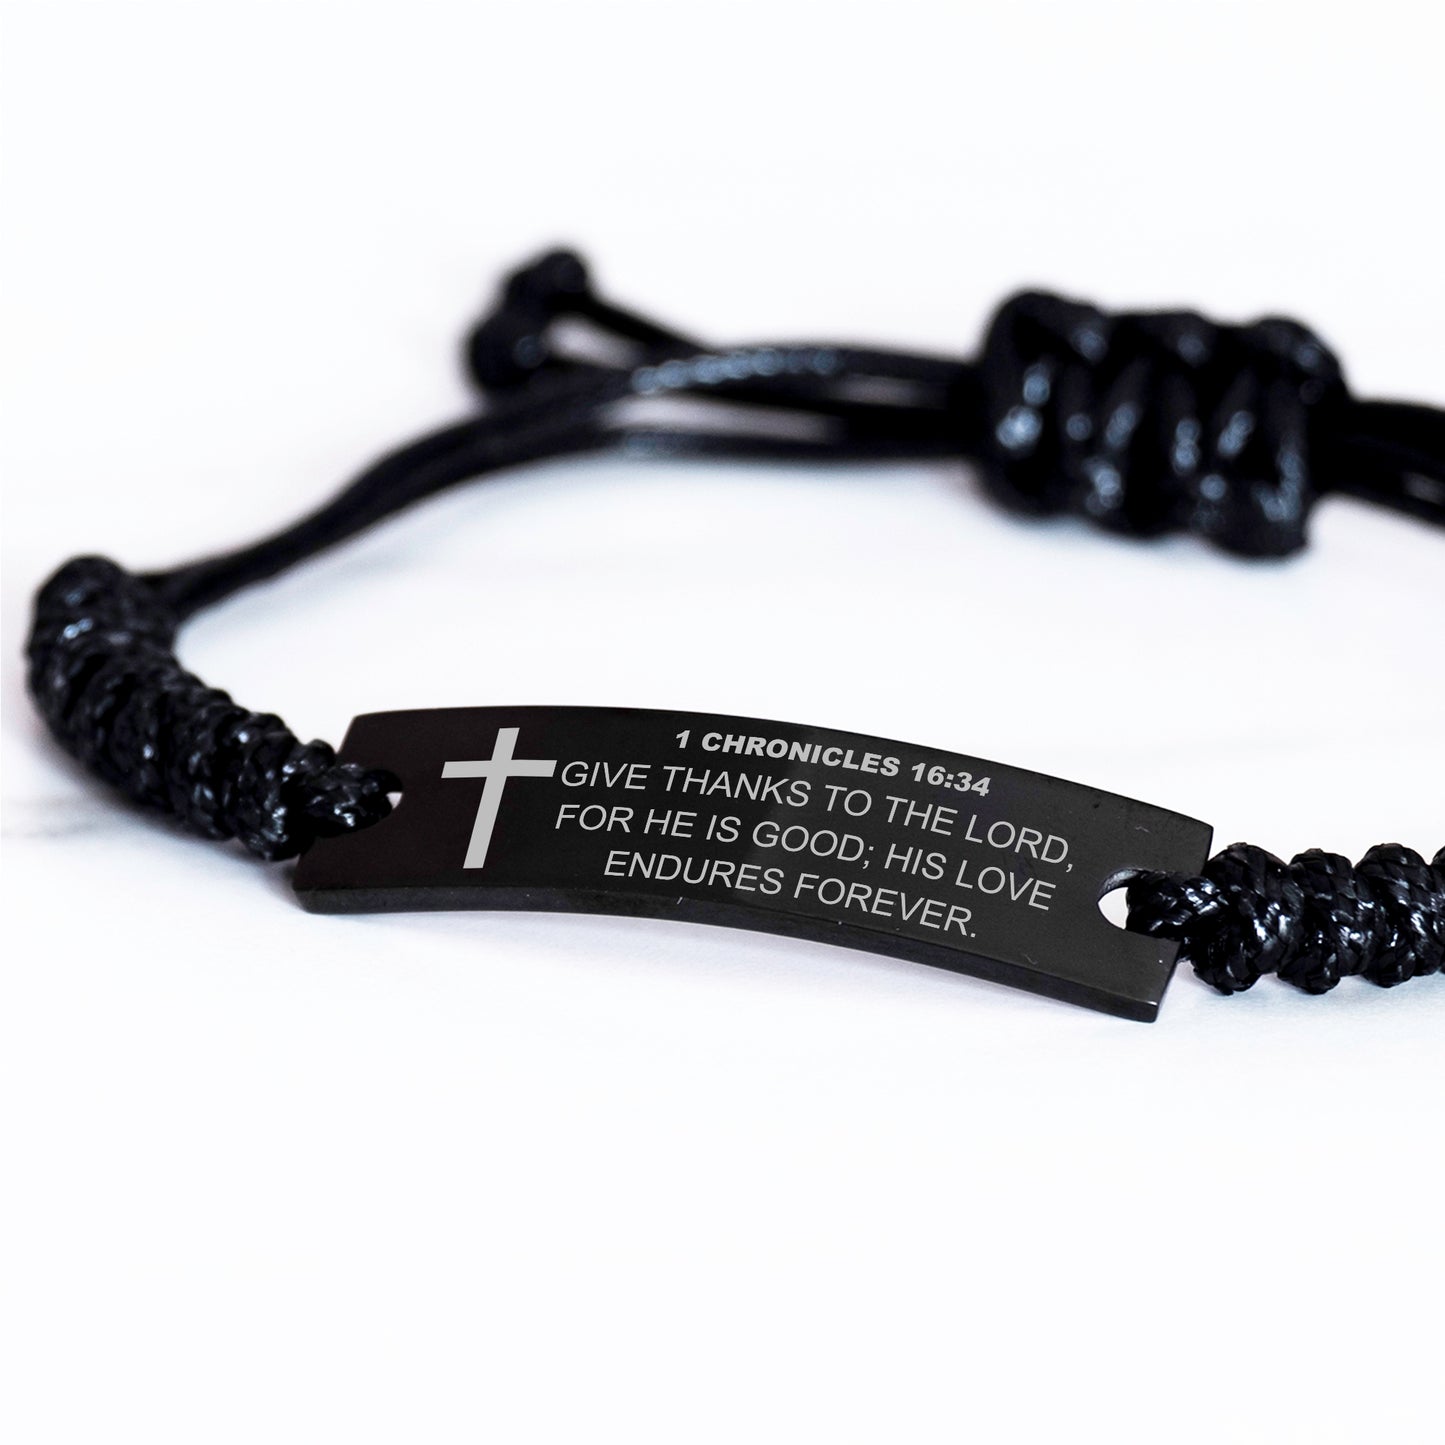 1 Chronicles 16 34 Bracelet, Give Thanks to the Lord, Bible Verse Bracelet, Black Braided Rope Bracelet, Gift for Christian.